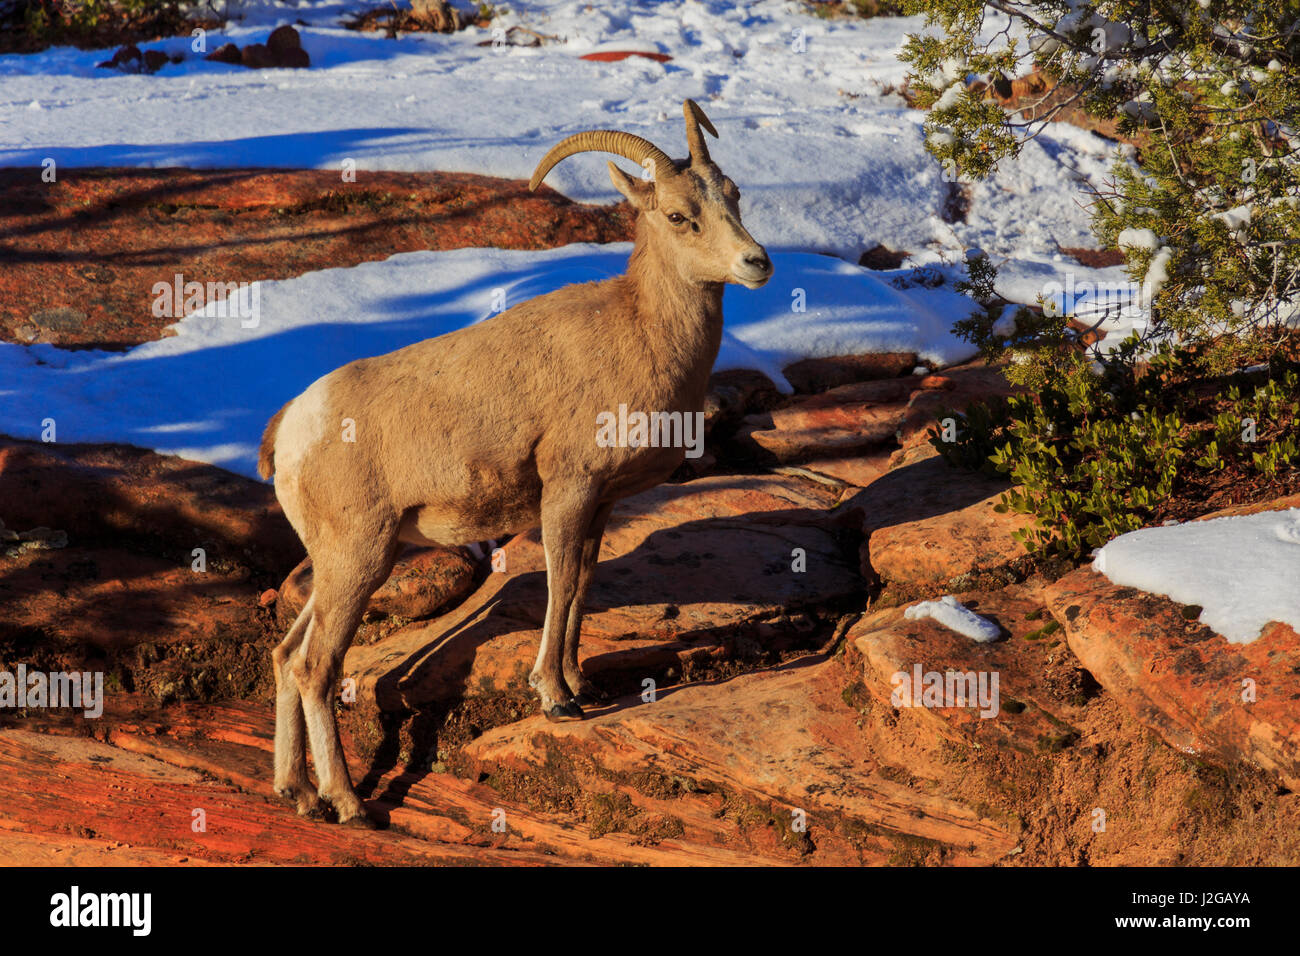 A female desert big horn sheep steps up the red rock as it grazes in Zion National Park, Utah.  This view is from the Zion-Mount Carmel Scenic Byway. Stock Photo